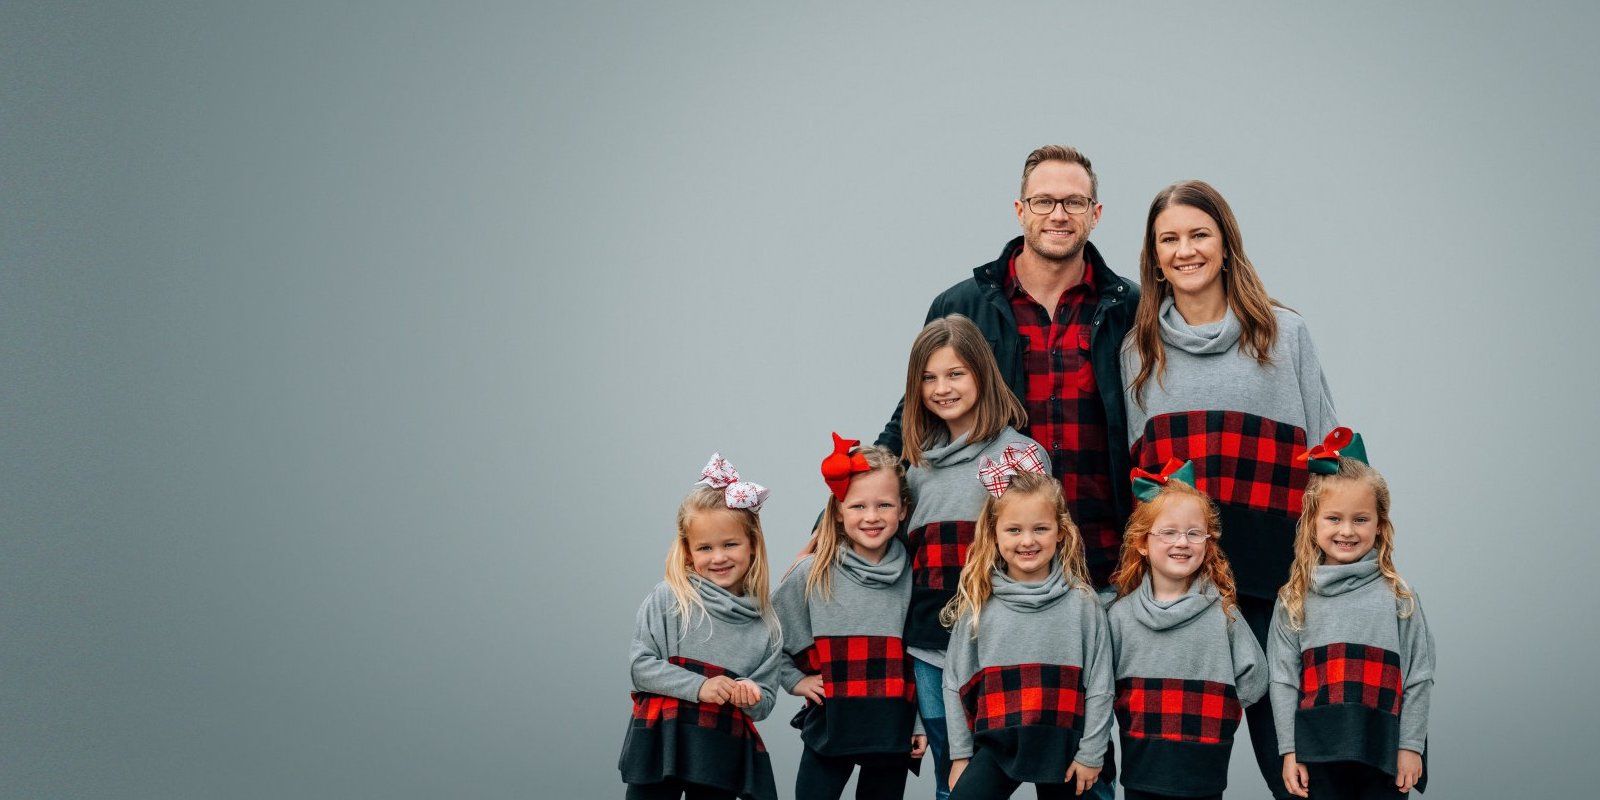 Outdaughtered cast wearing matching outfits